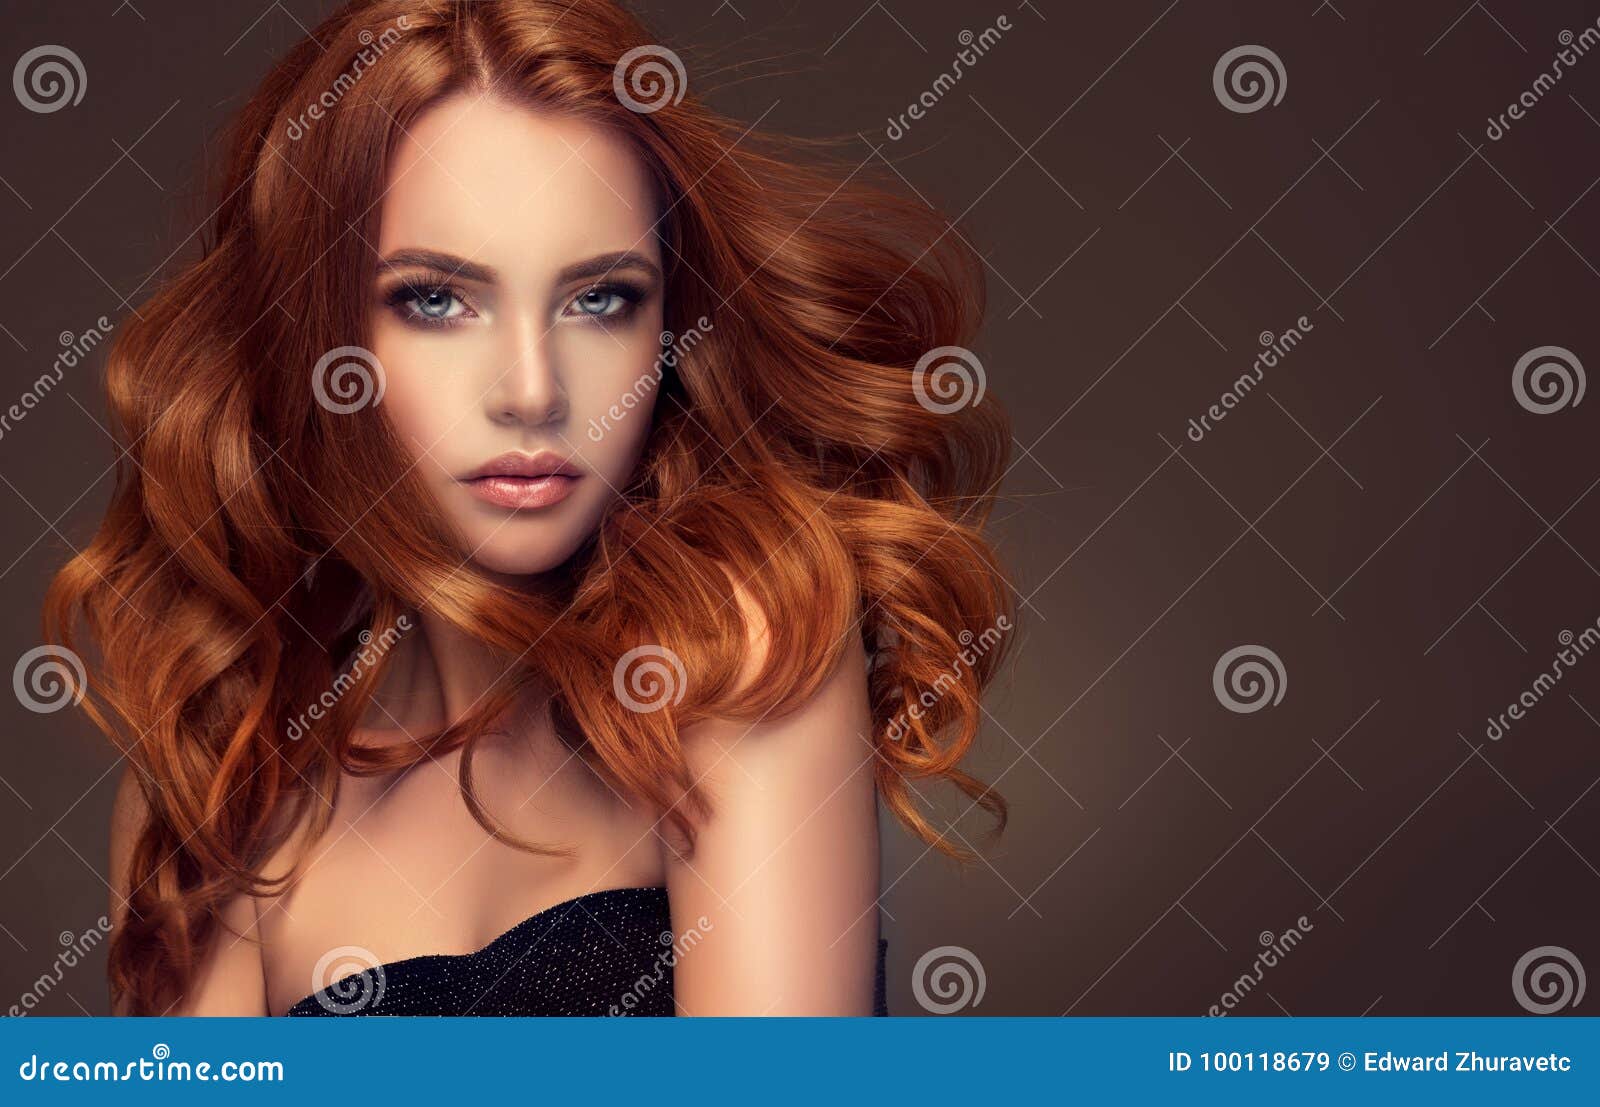 red haired woman with voluminous, shiny and curly hairstyle. flying hair.